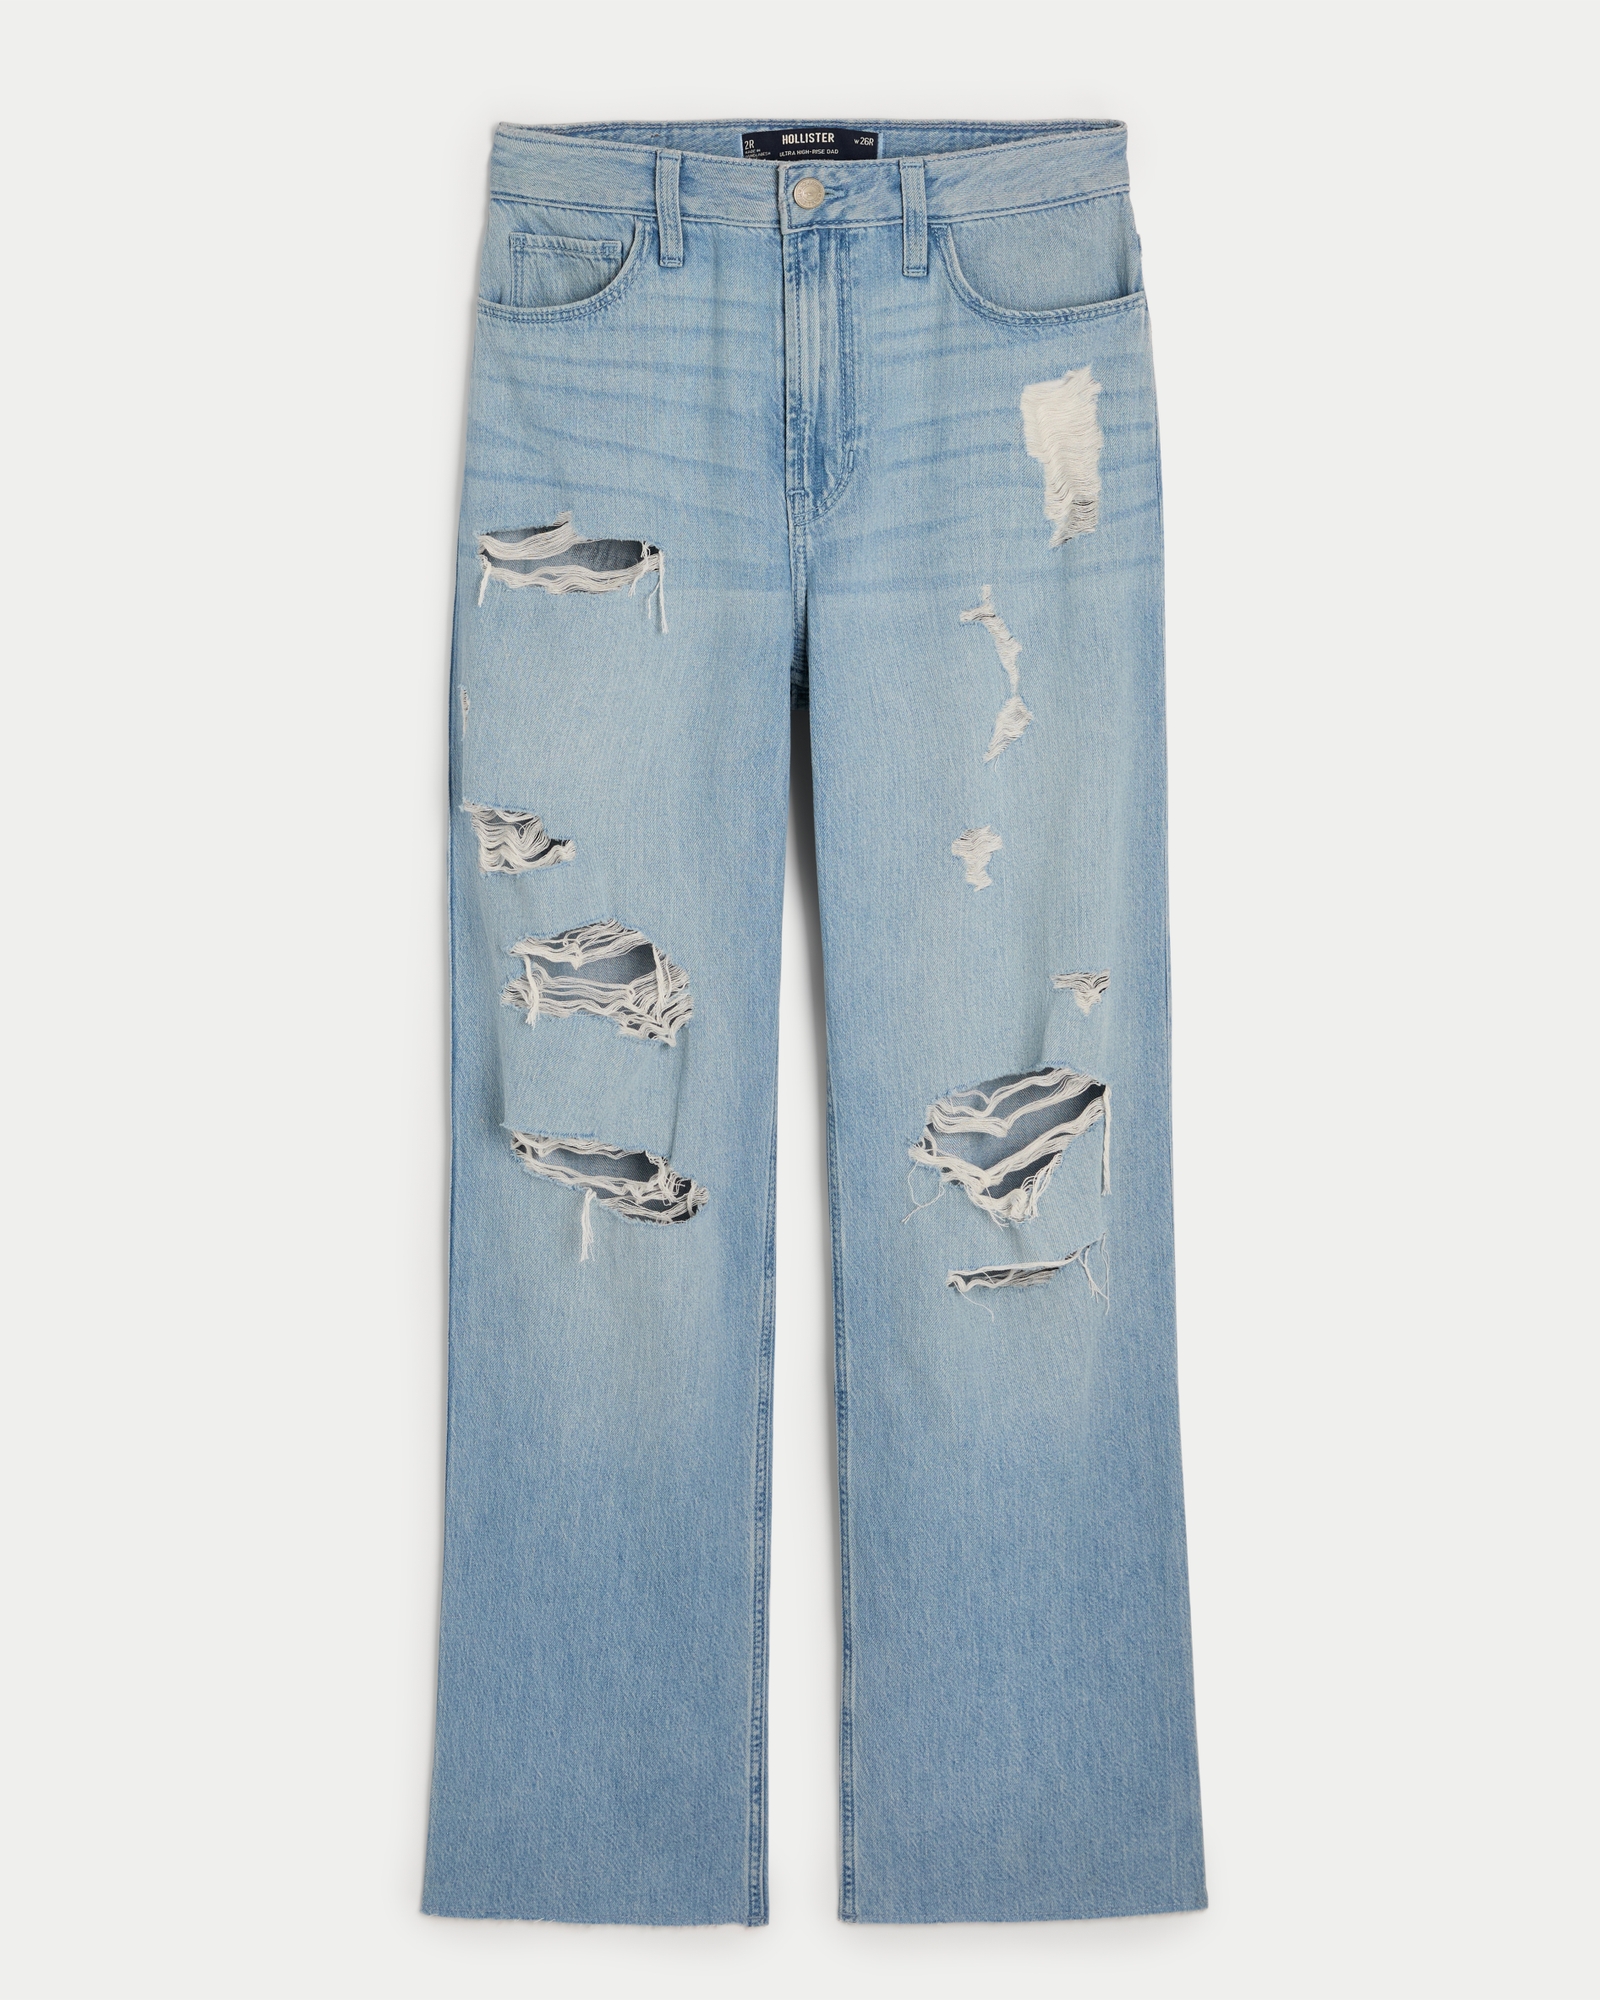 https://img.hollisterco.com/is/image/anf/KIC_355-4232-0156-281_prod1.jpg?policy=product-extra-large